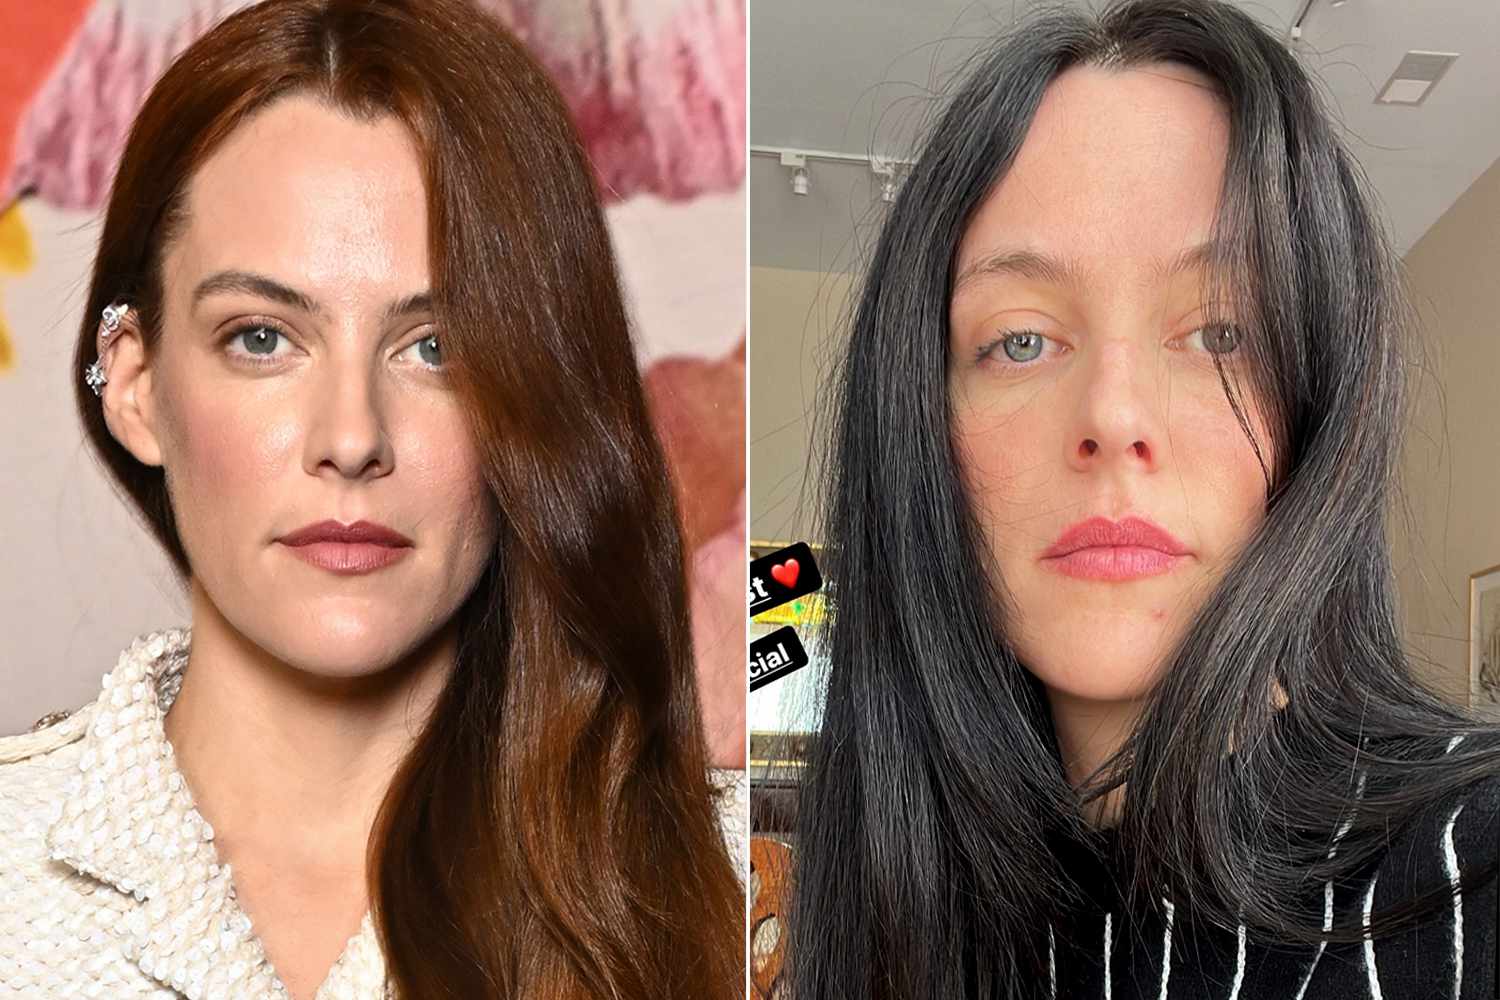 Riley Keough stuns with bold hair transformation at Virginia Film Festival - See her incredible new look! 3